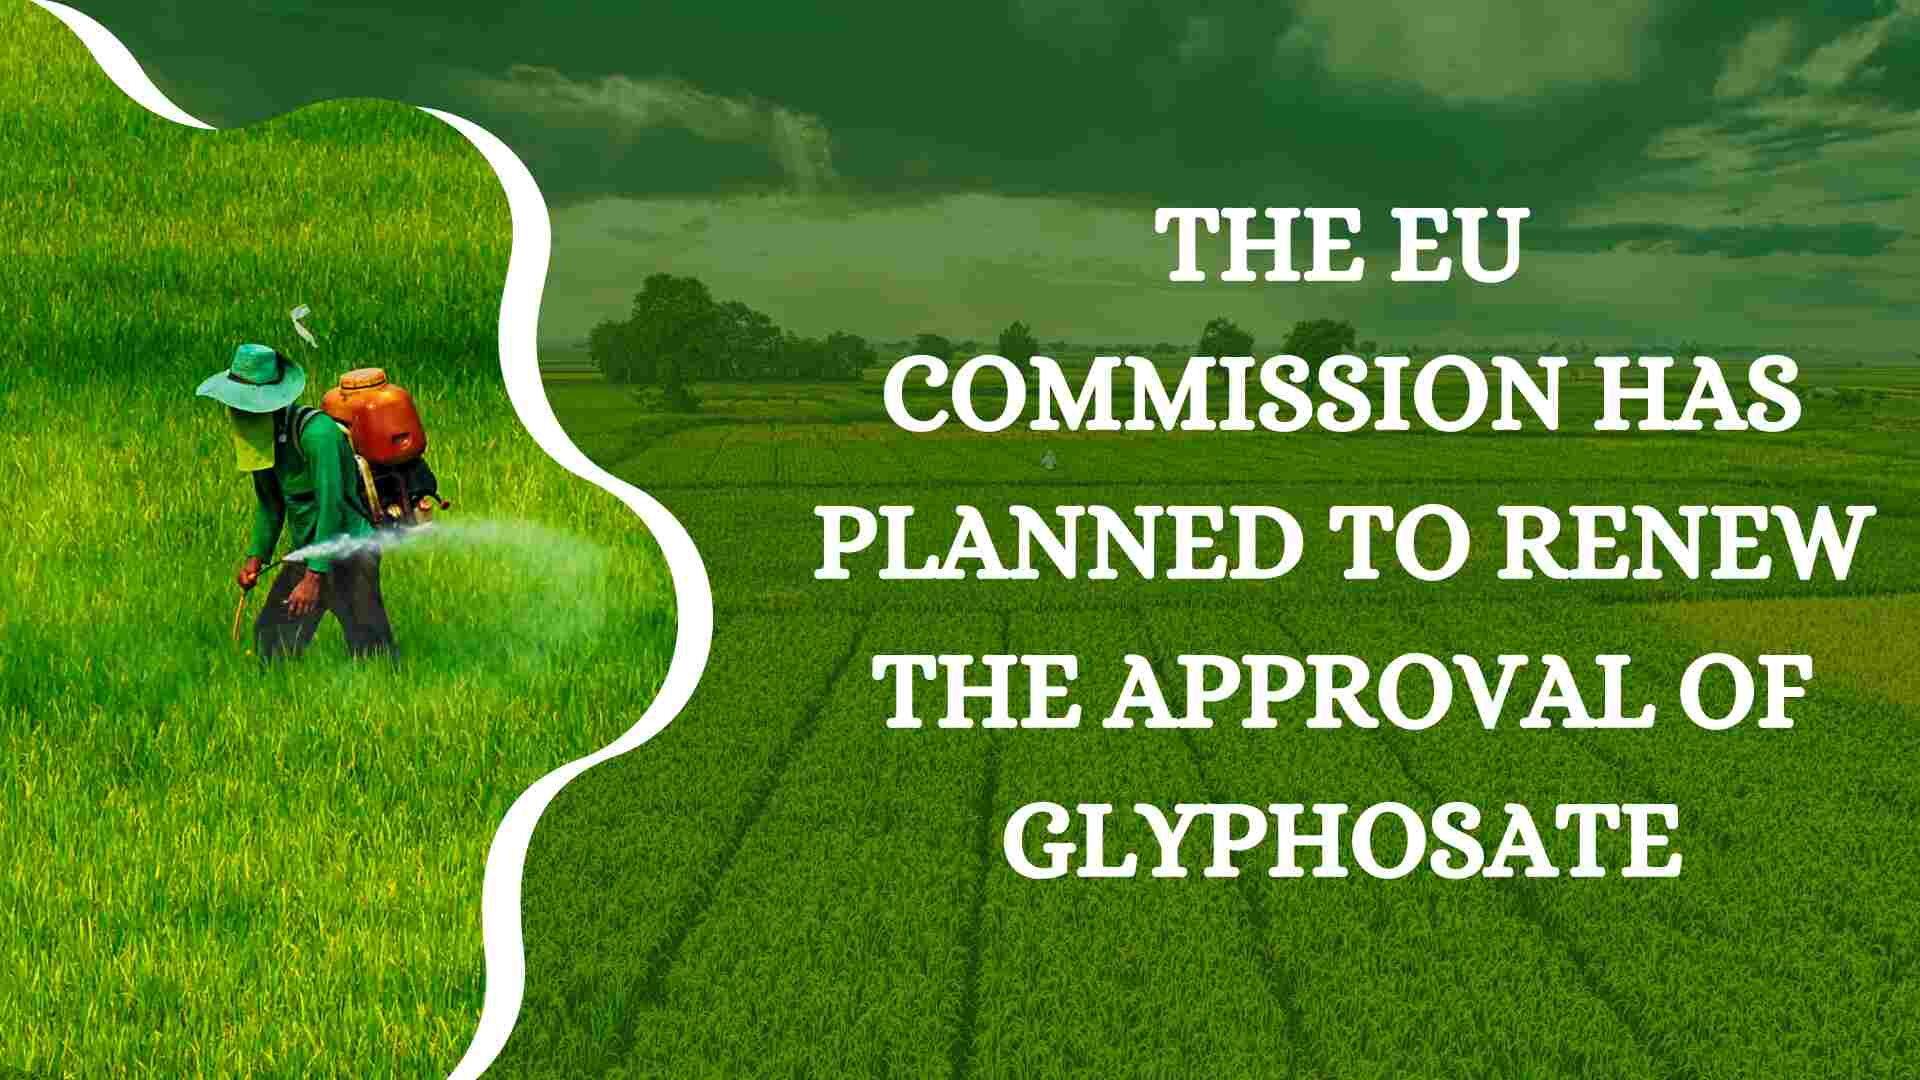 EU extends glyphosate approval for 10 years with stricter rules,